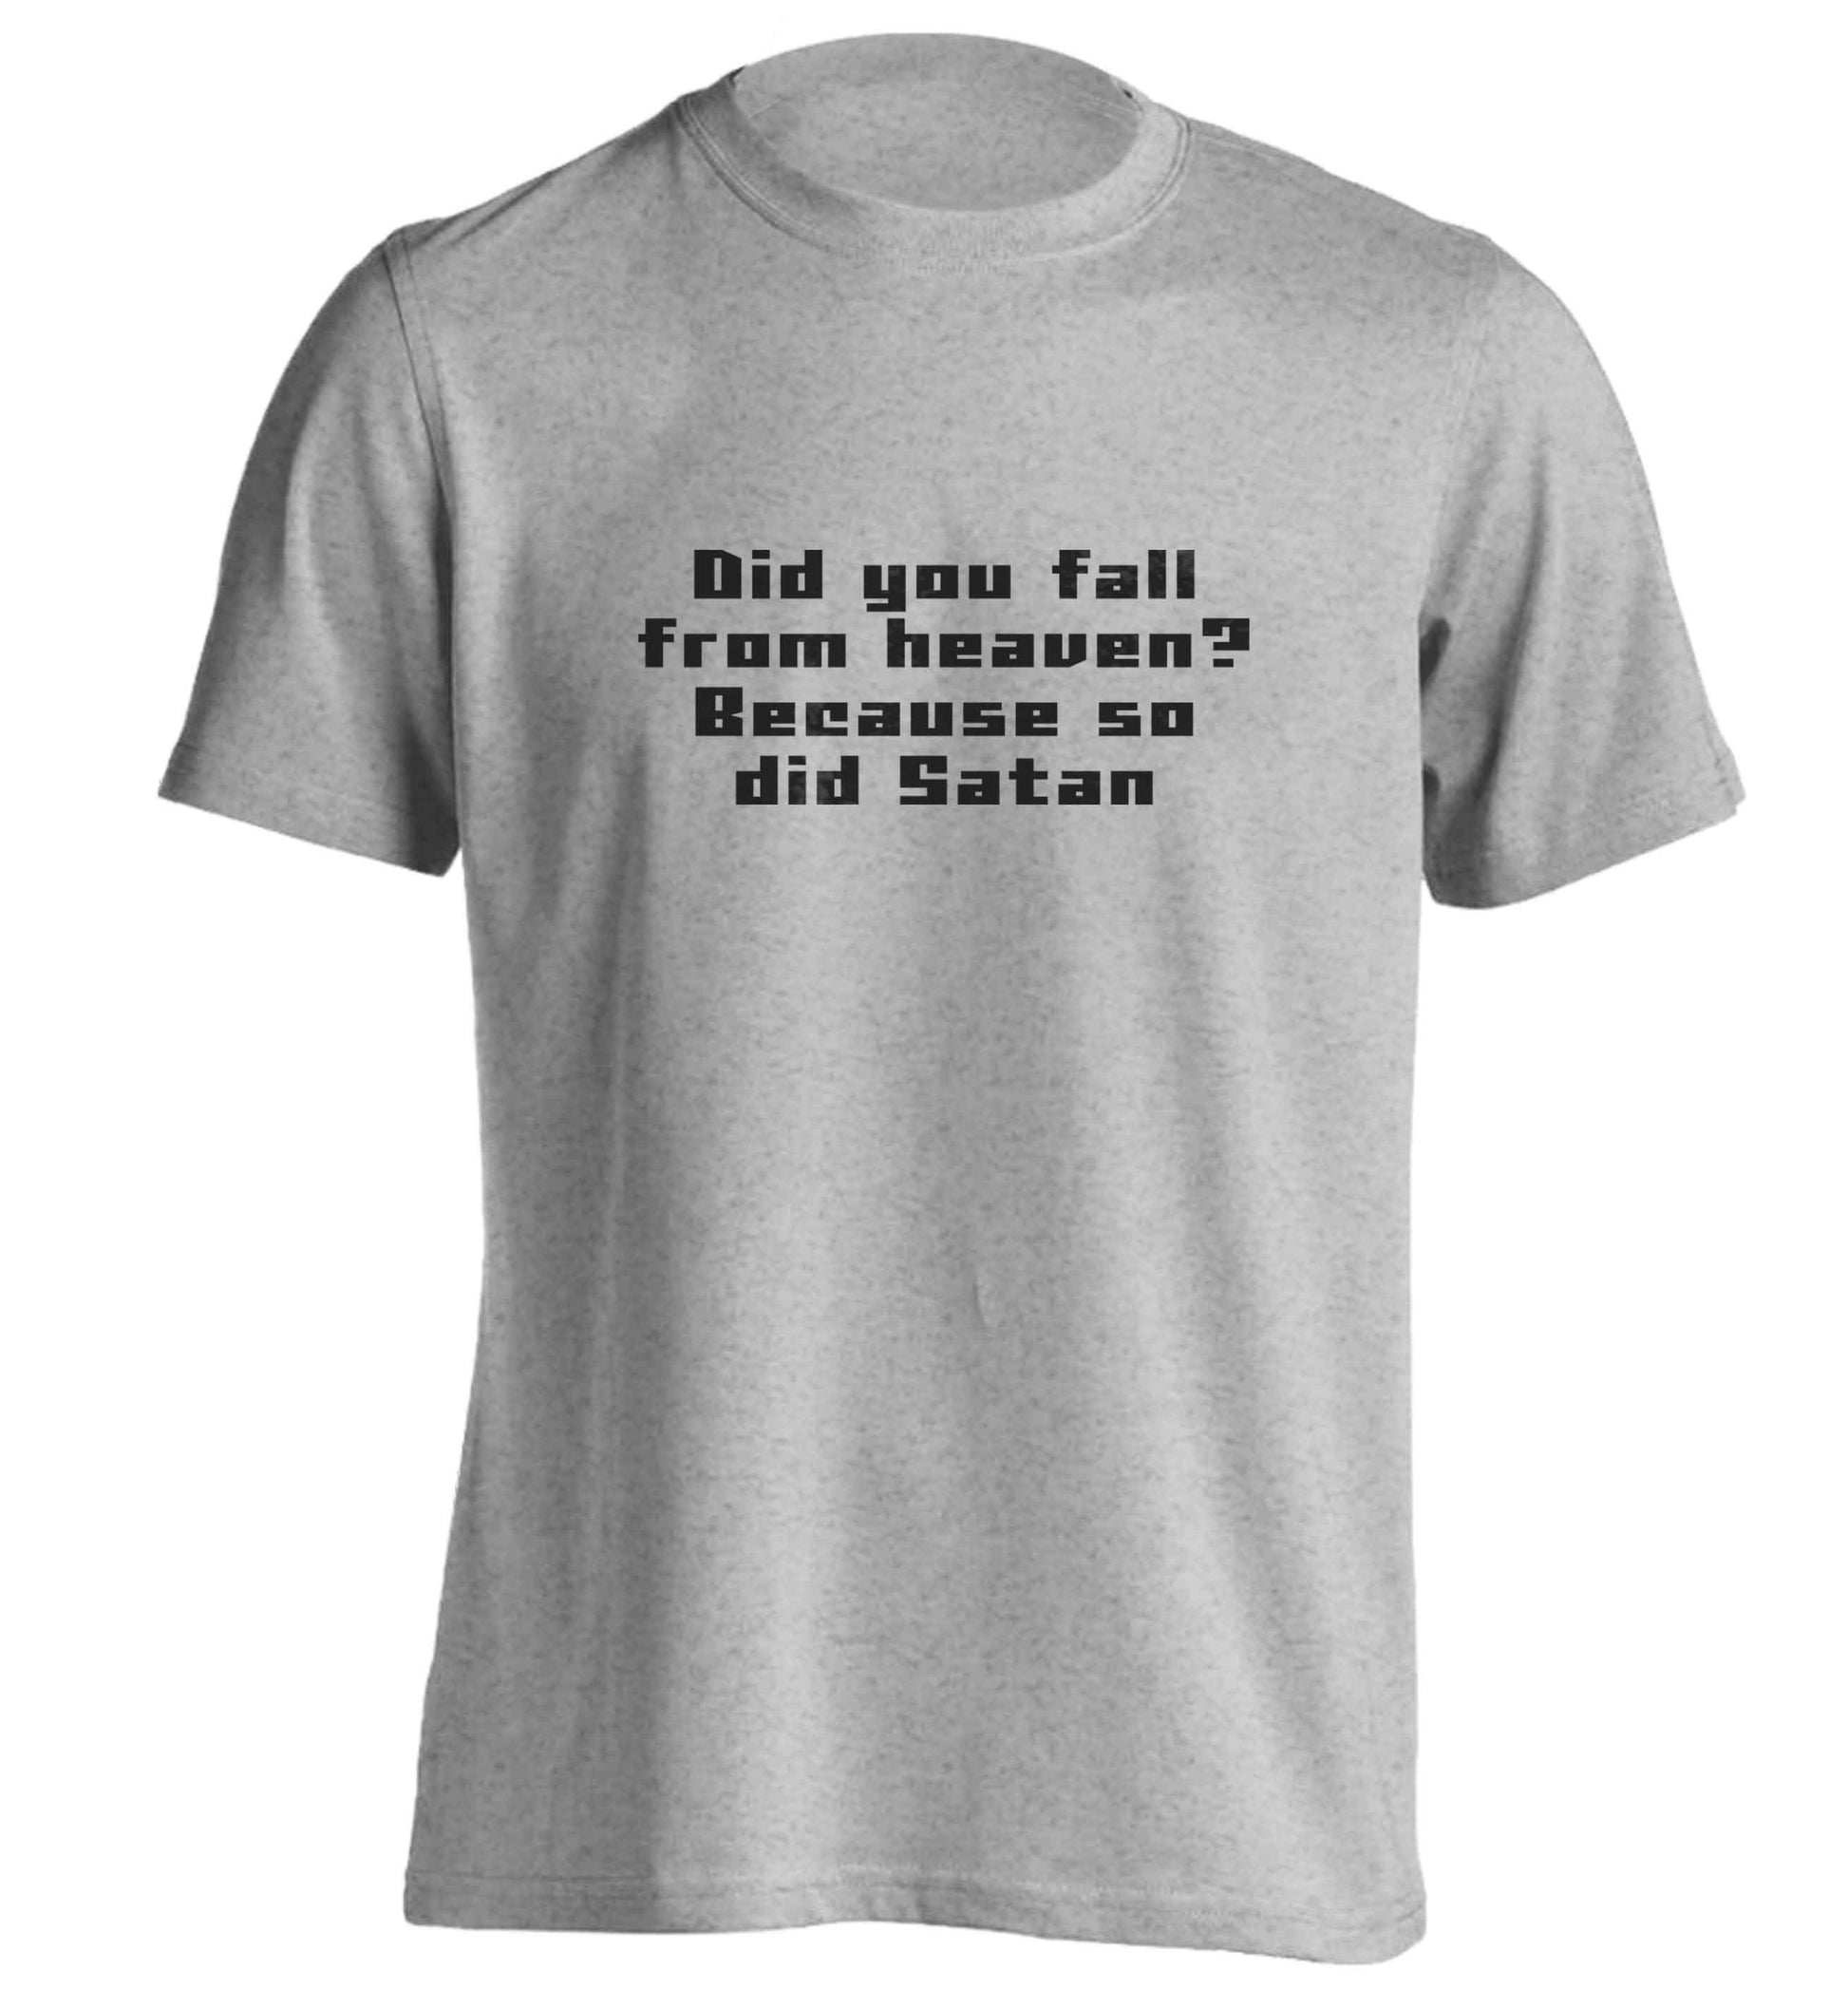 Did you fall from Heaven because so did Satan adults unisex grey Tshirt 2XL